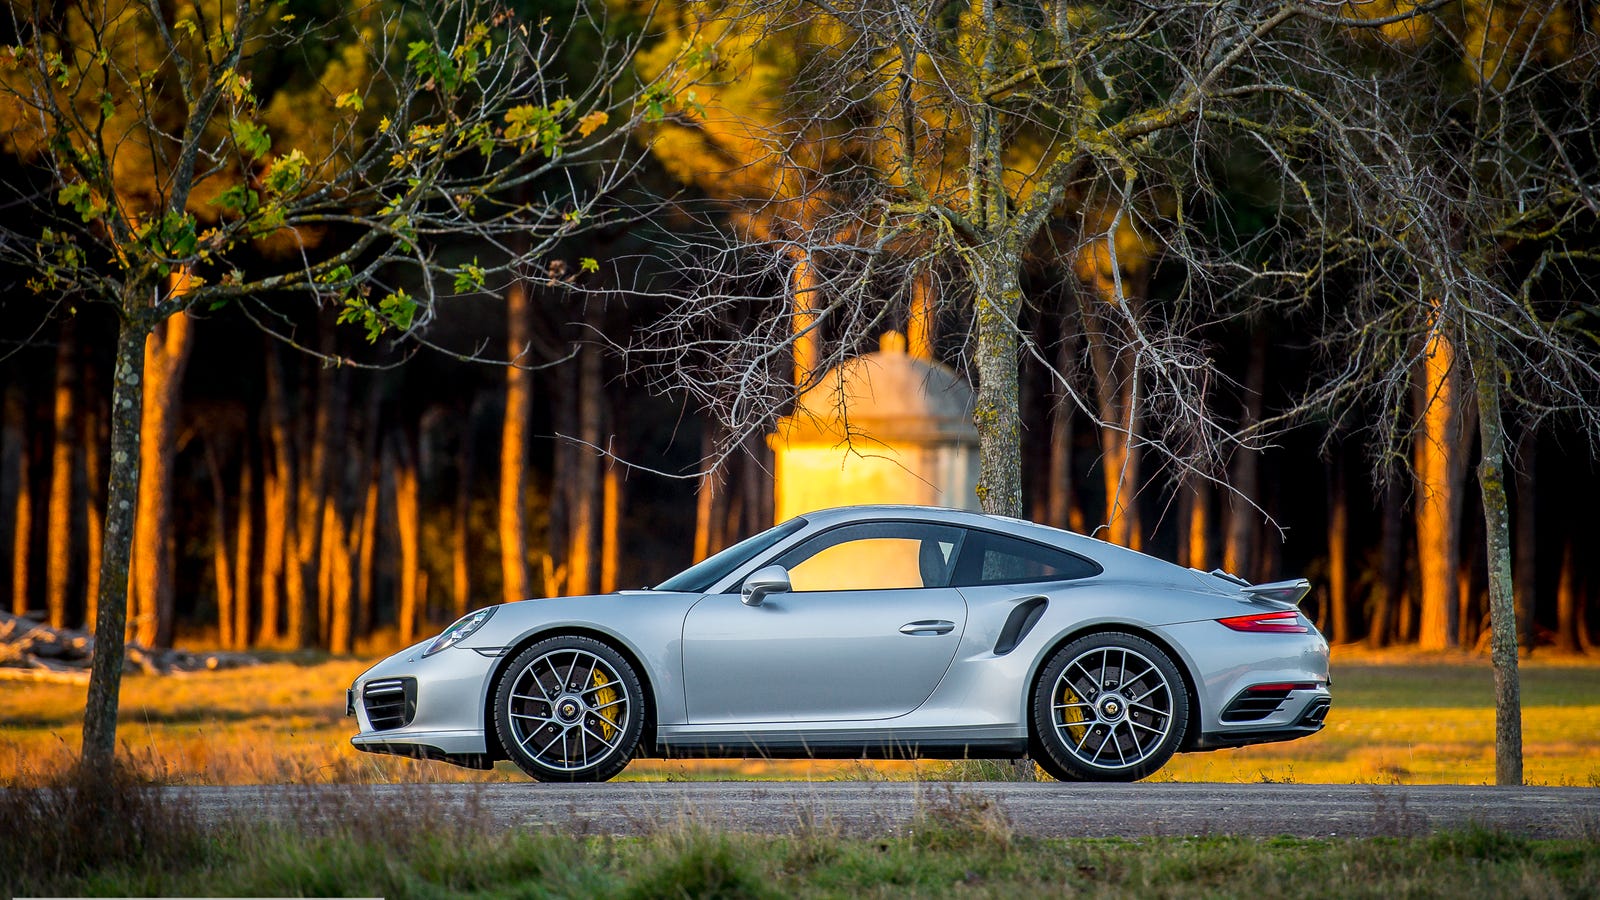 Your Ridiculously Awesome Porsche 911 Turbo S Wallpaper Is ...